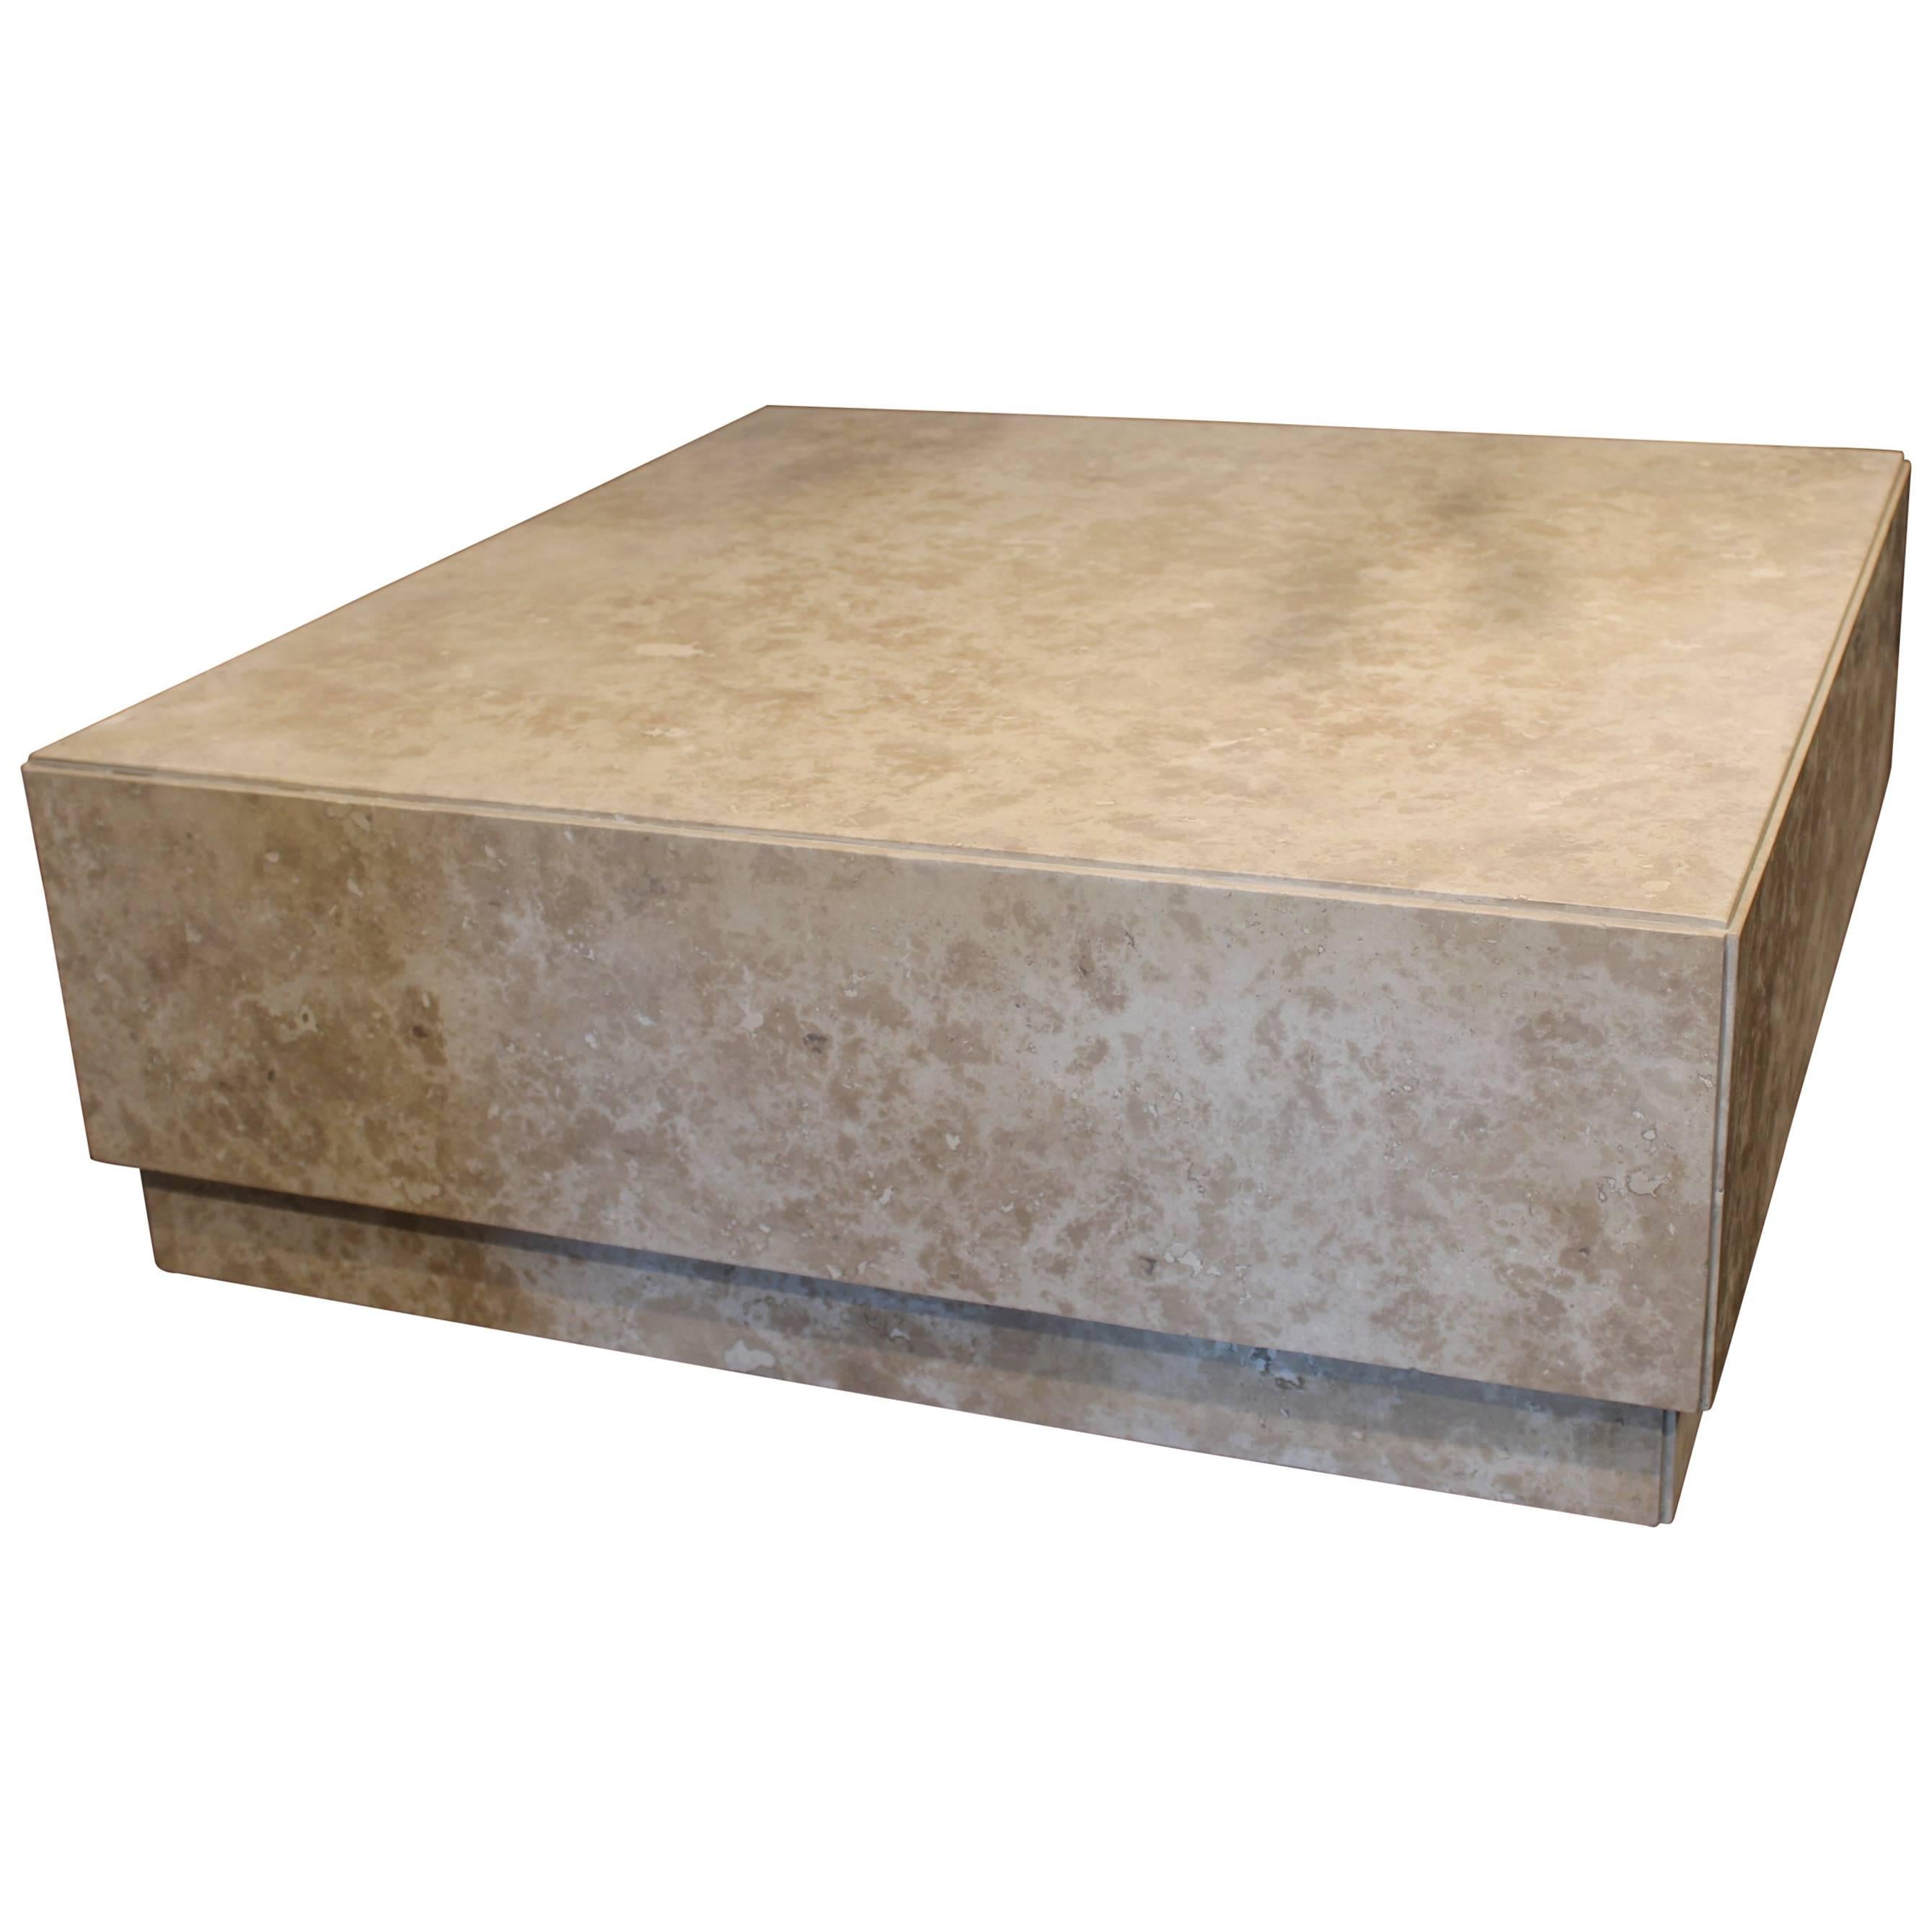 Contemporary Coffee Table with Mitered Corners in Honed Travertine Marble